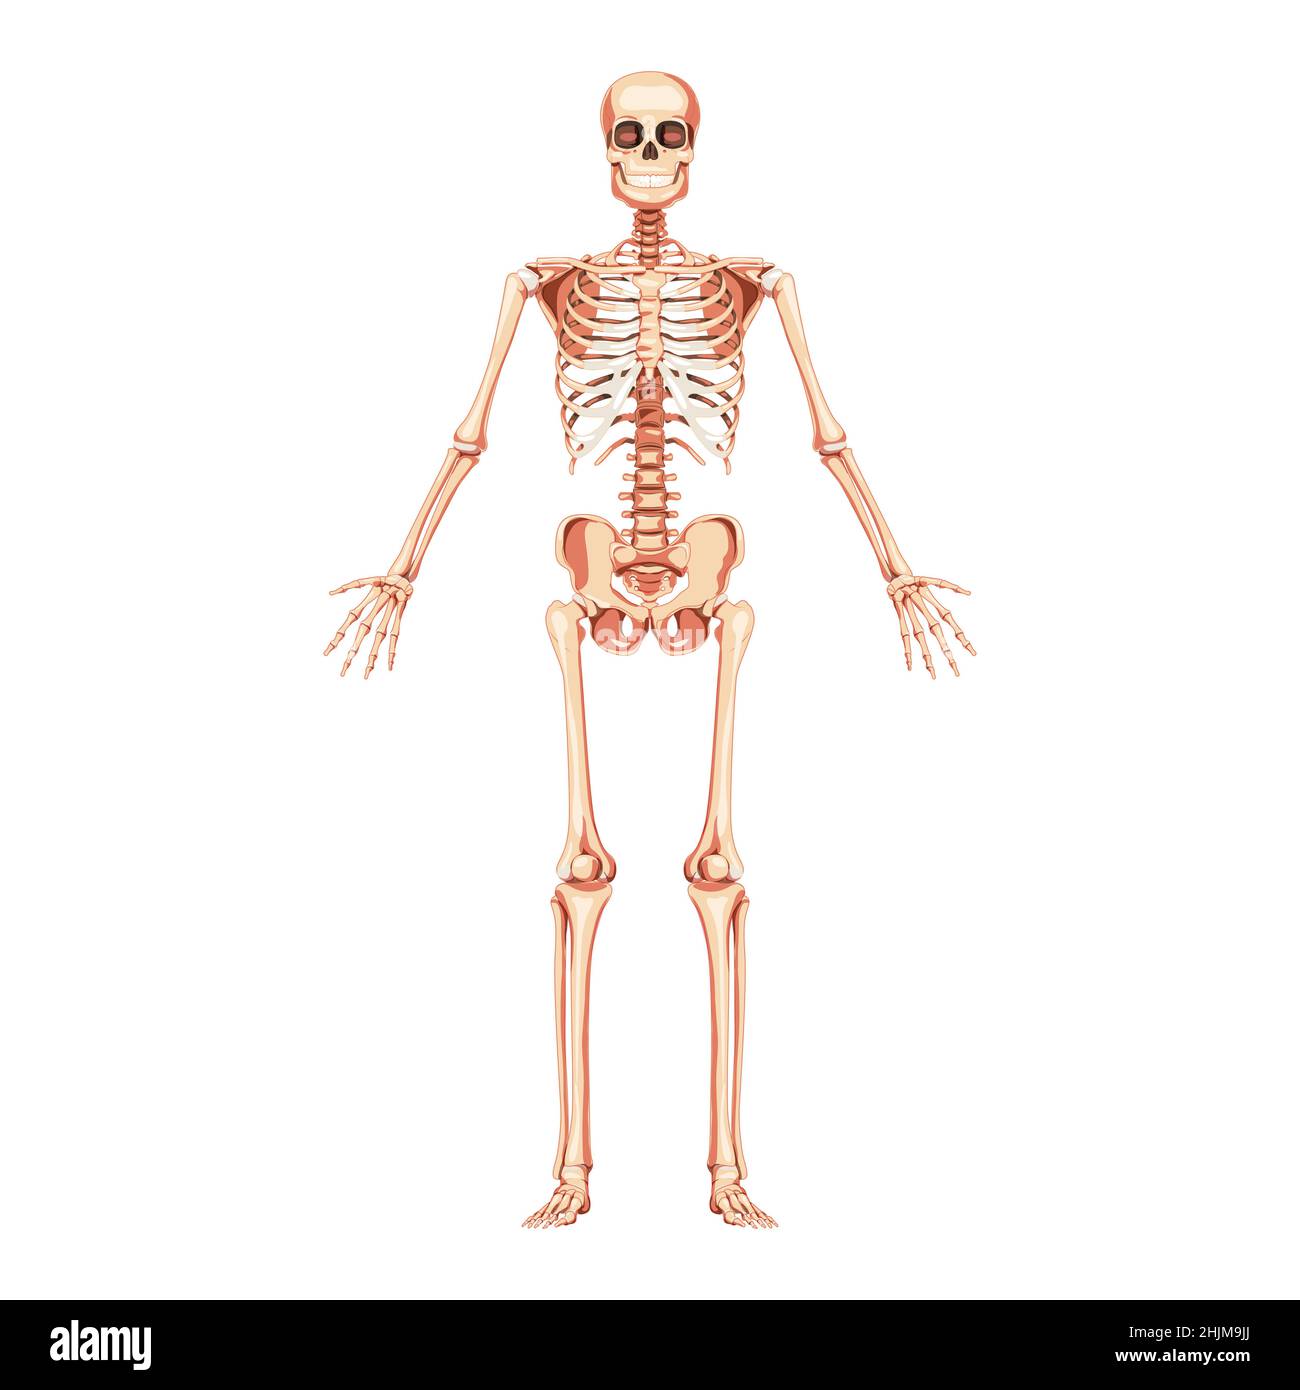 Skeleton Human front anterior view open arms straight. Realistic Anatomical flat natural color concept medically accurate illustration Vector illustration board of anatomy isolated on white background Stock Vector